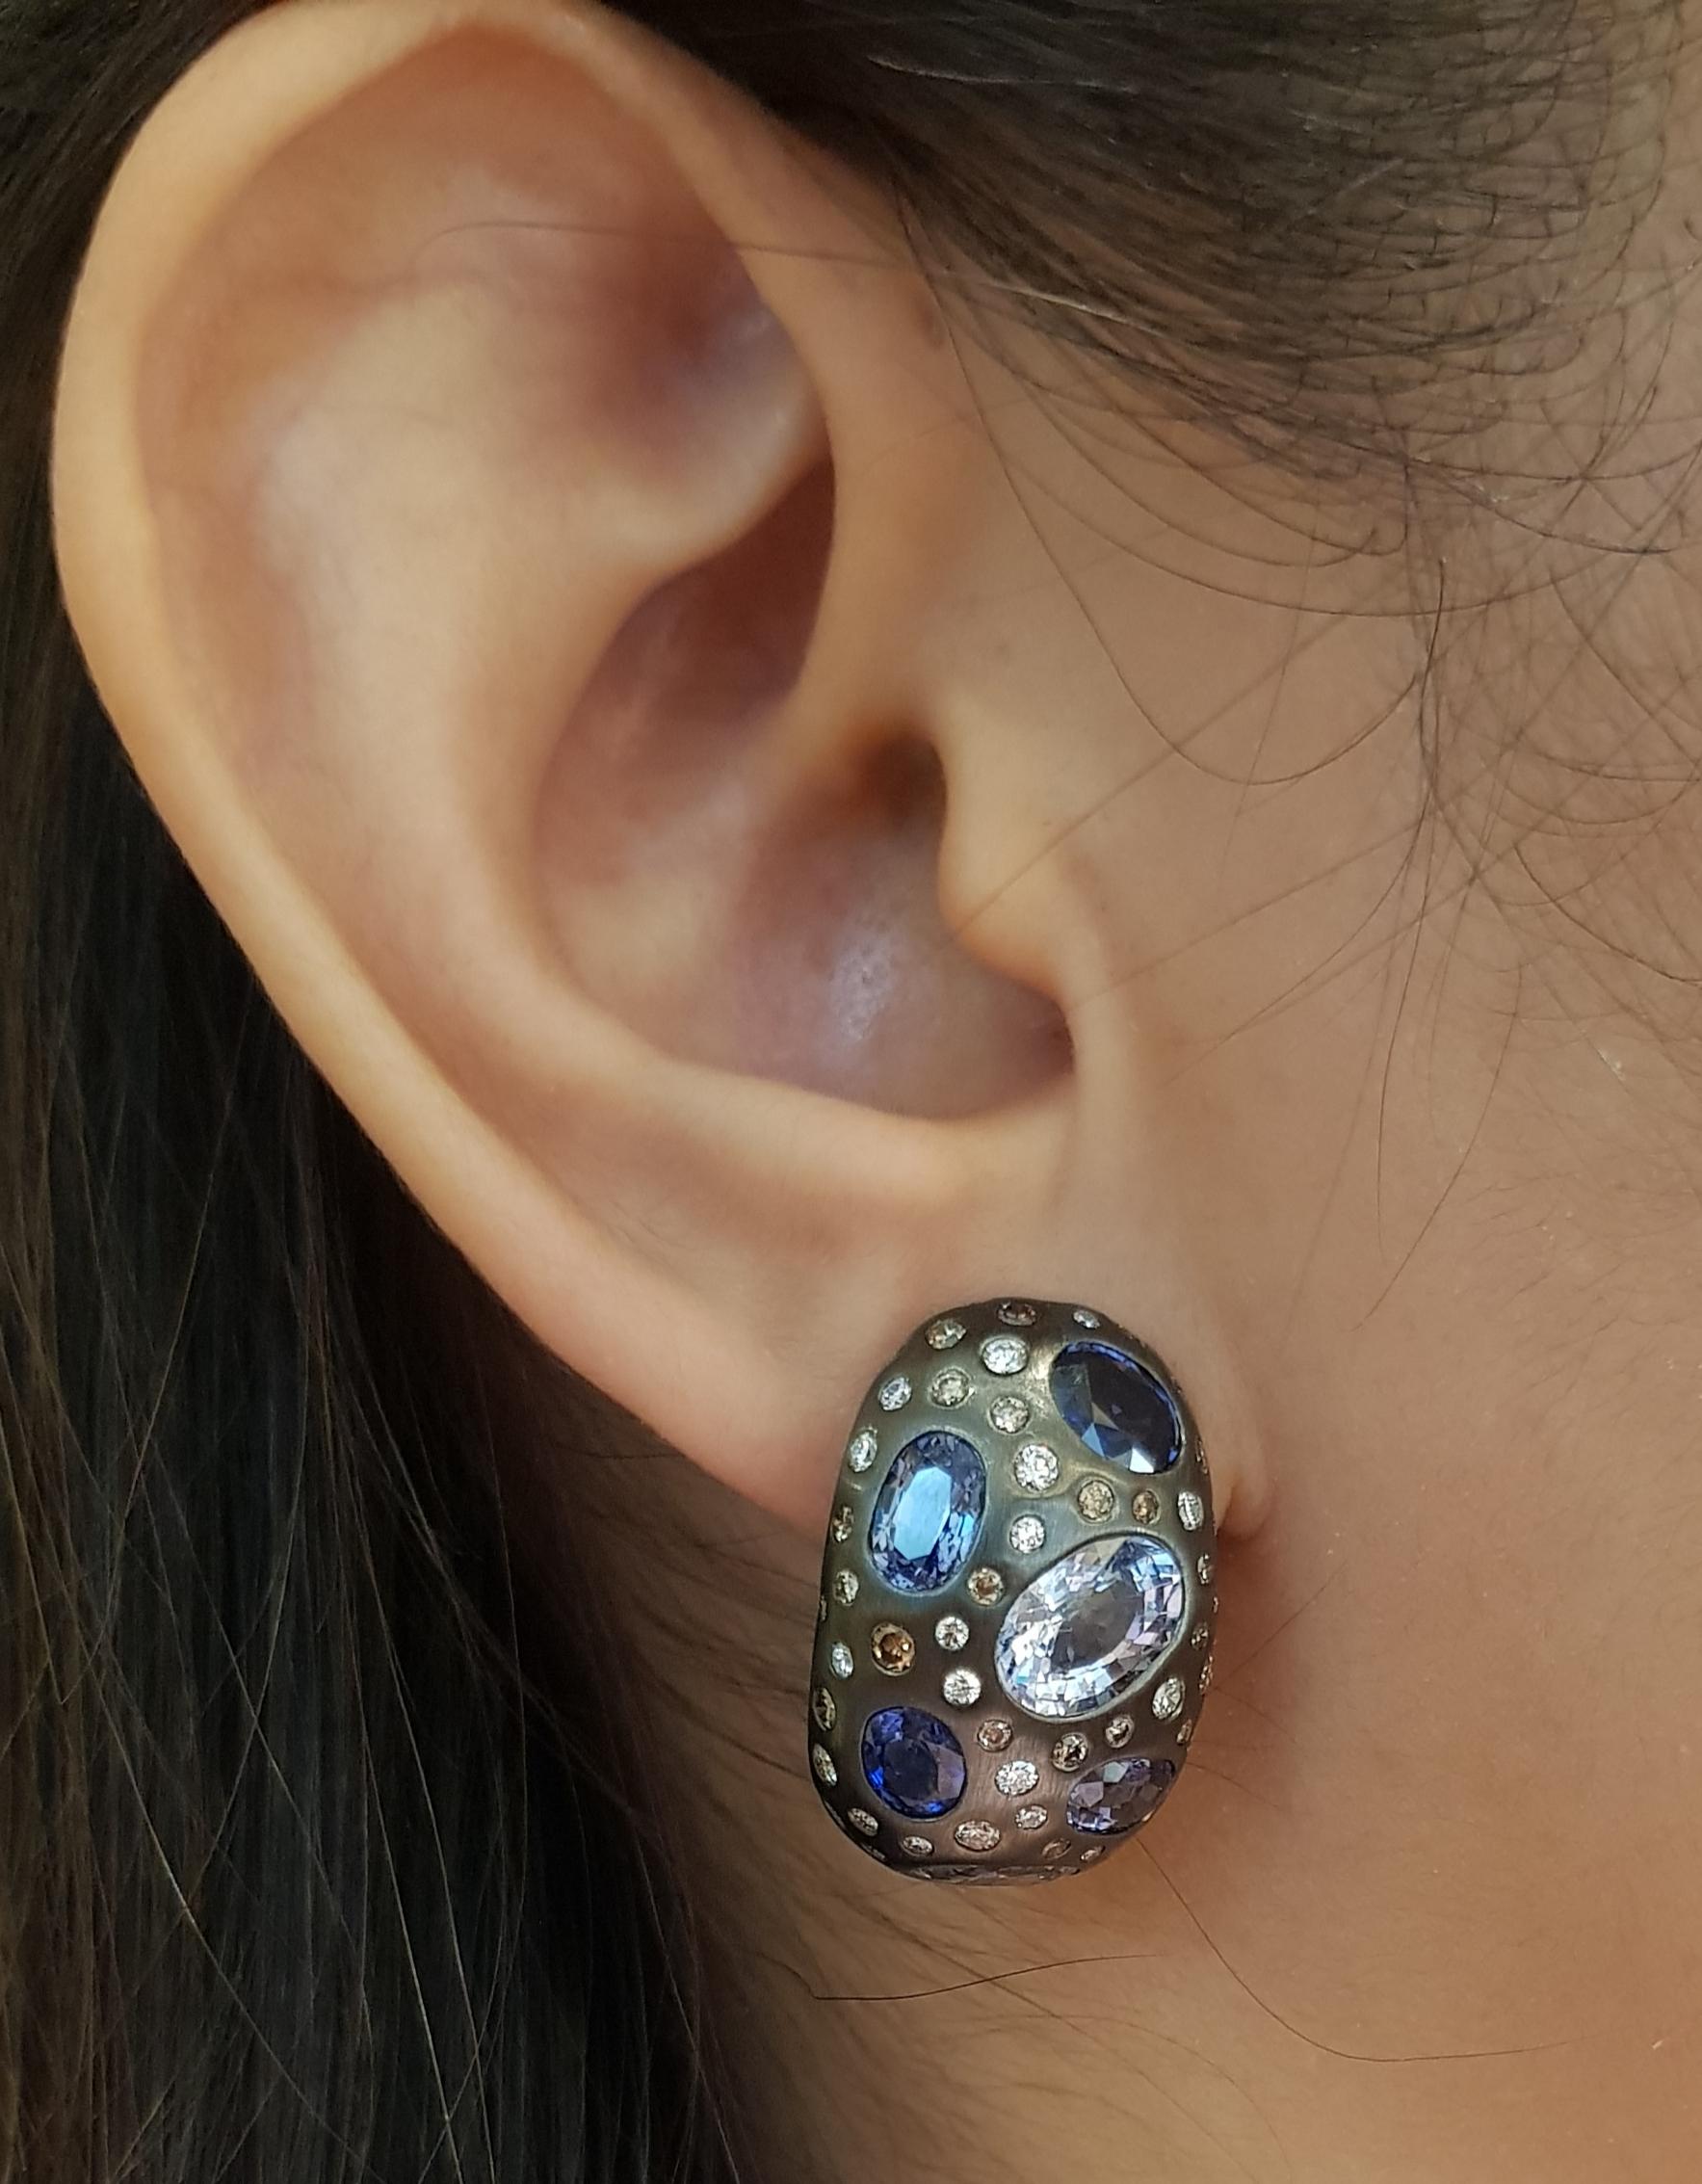 Blue Sapphire 10.80 carats with Diamond 0.82 carat and Brown Diamond 0.99 carat Earrings set in 18 Karat White Gold Settings

Width:  1.6 cm 
Length:  2.4 cm
Total Weight: 16.95 grams

